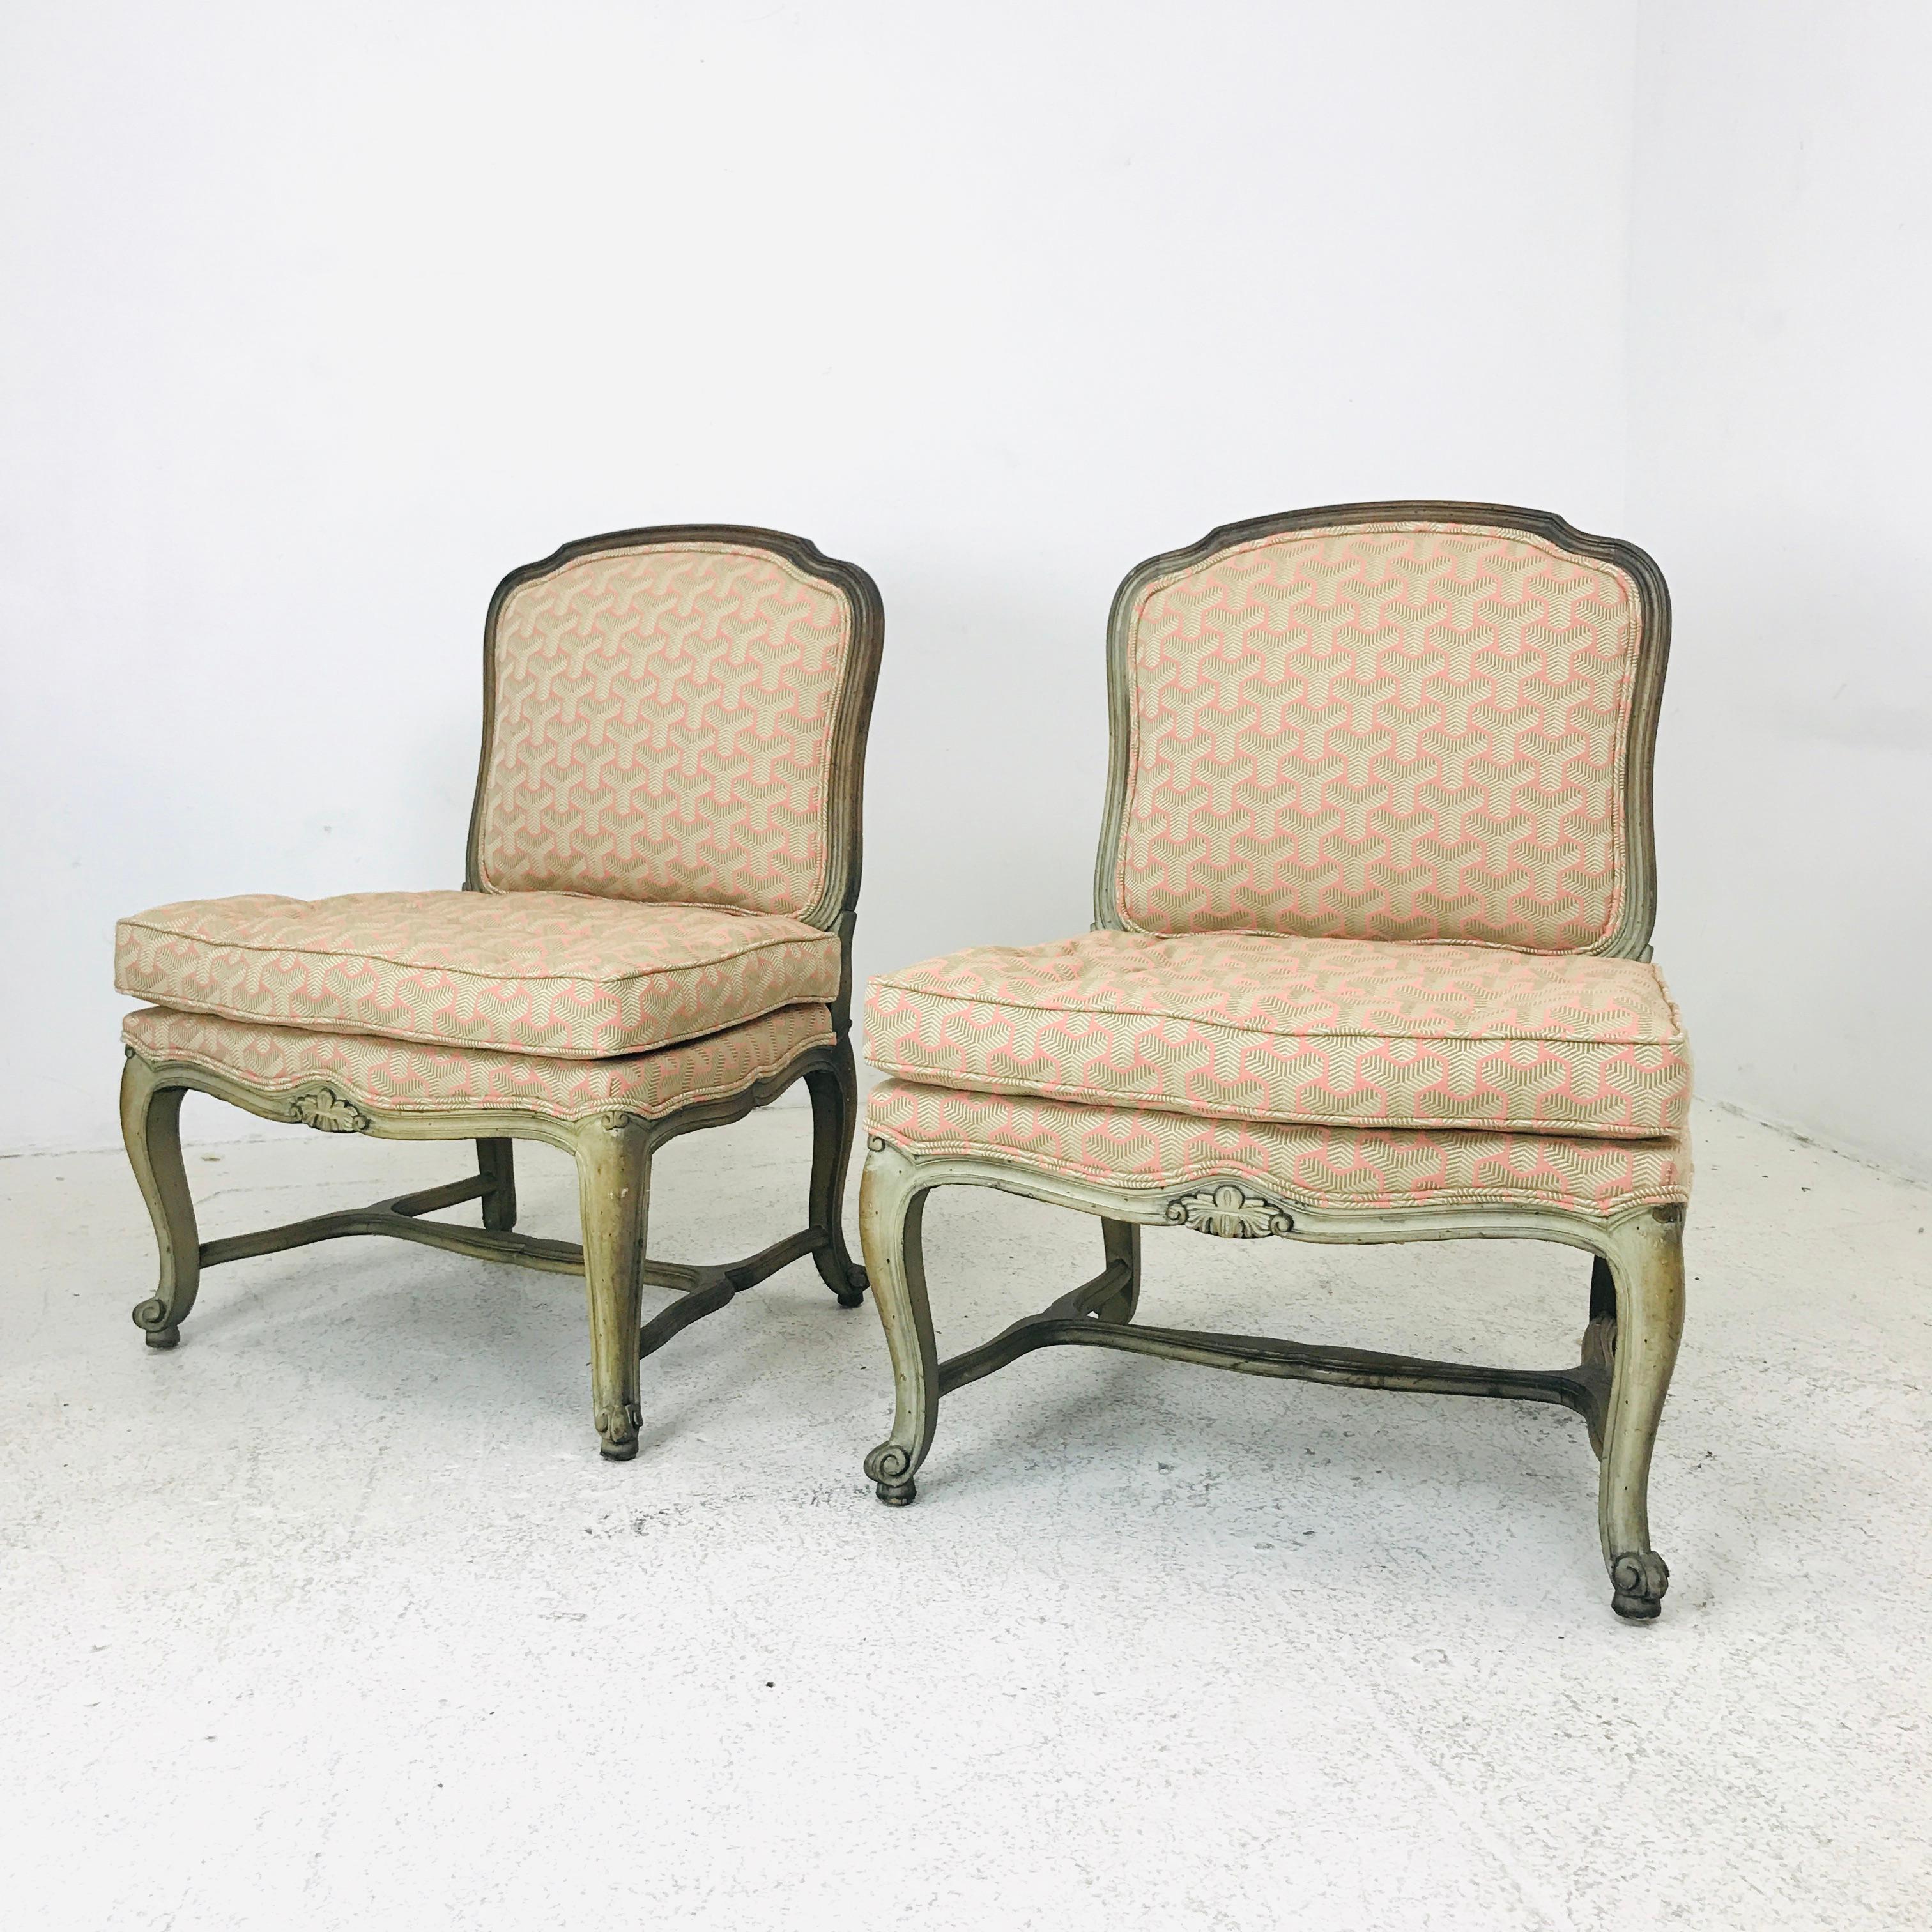 Pair of newly upholstered French slipper chairs.